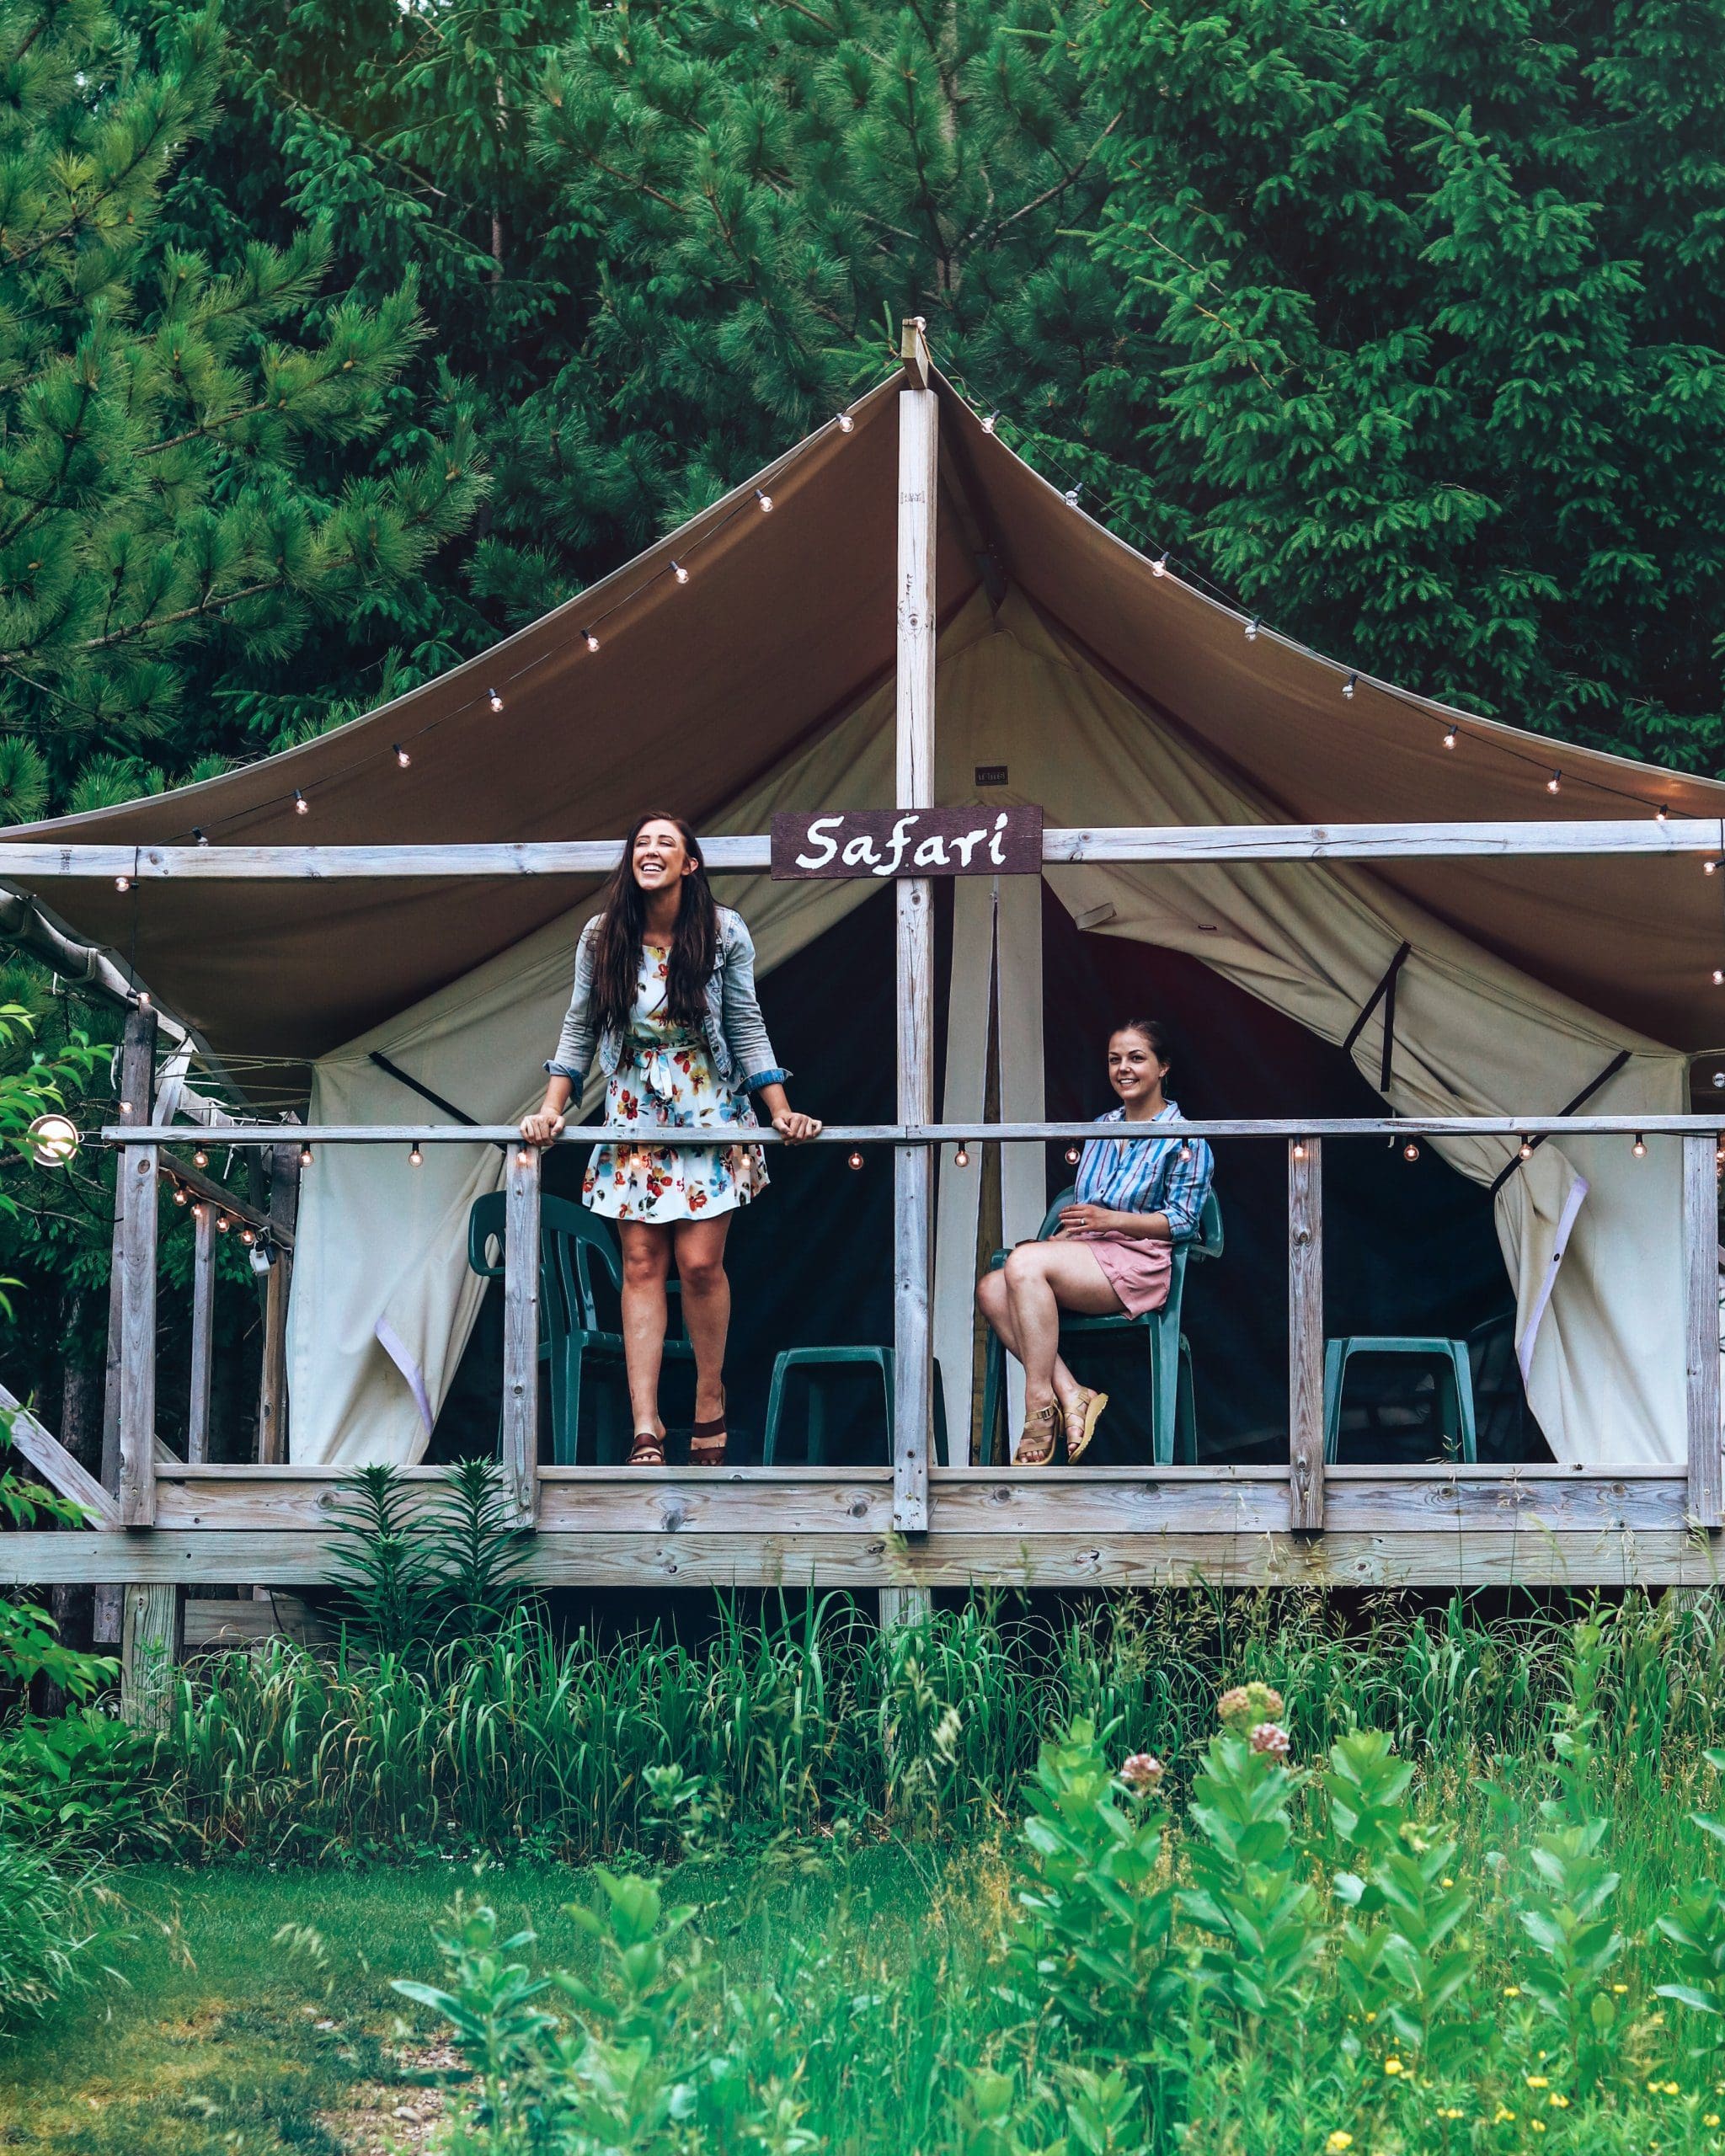 Glamping in Minnesota: The perfect summer getaway!